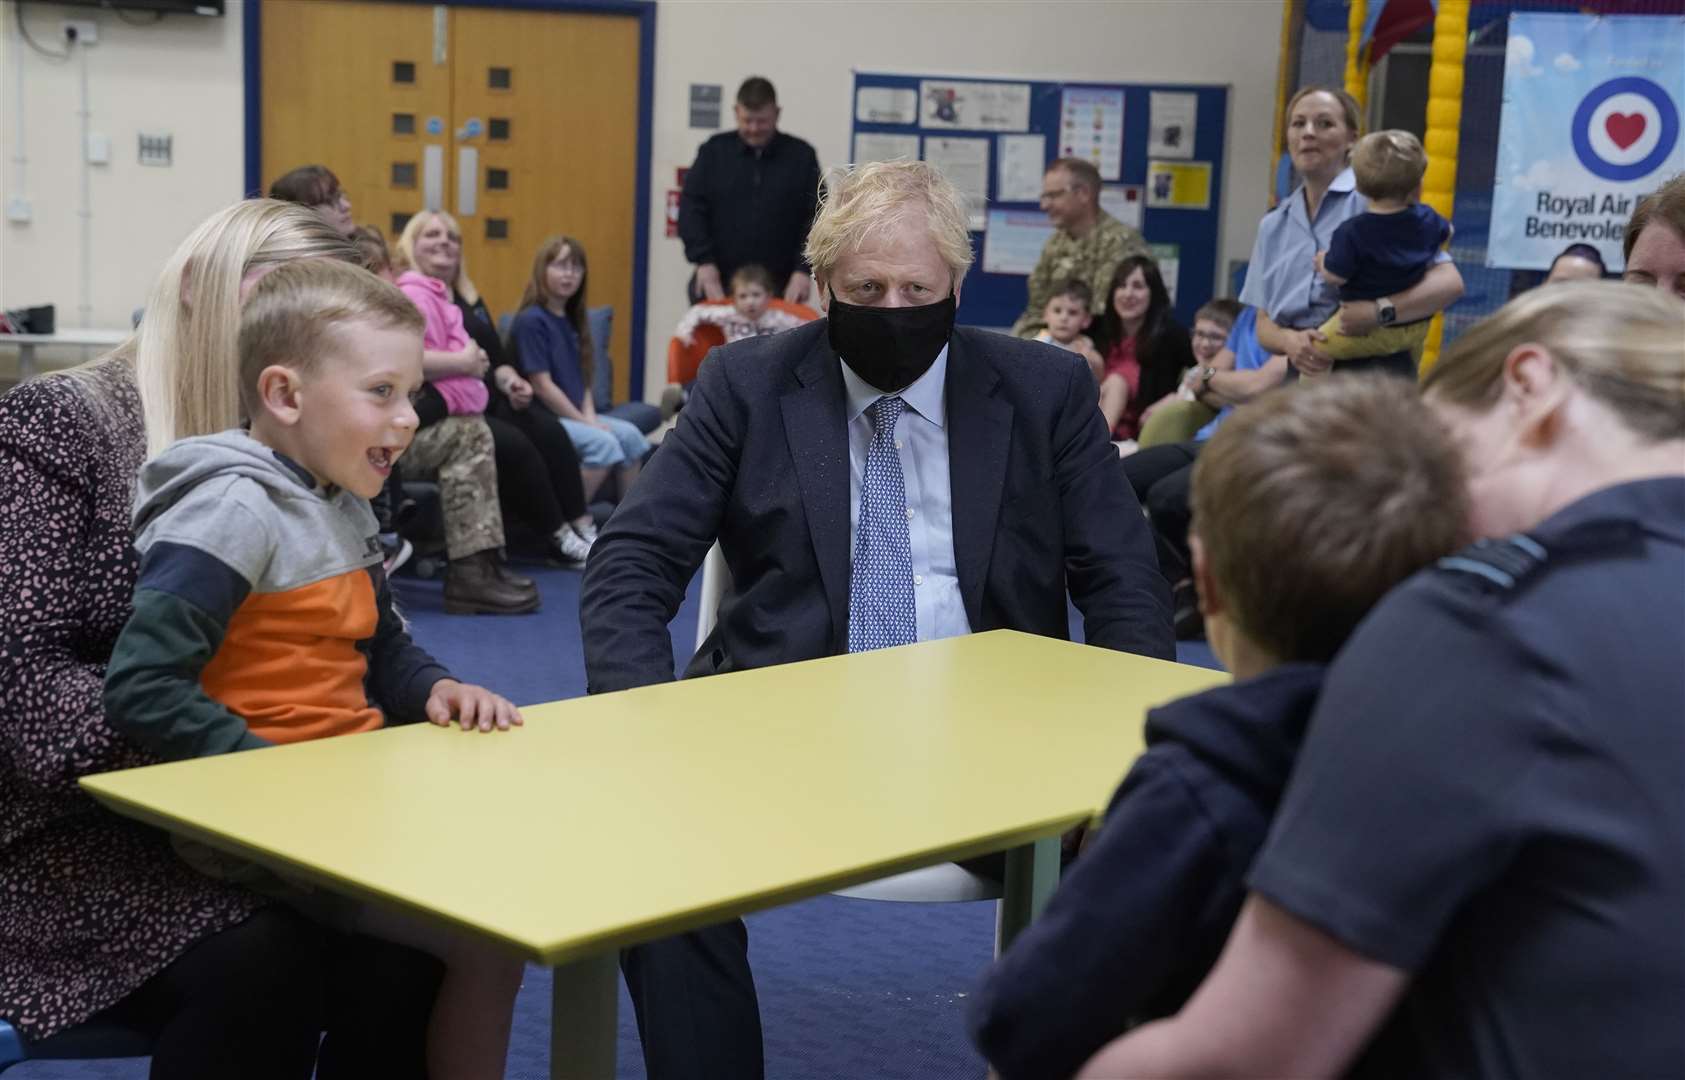 Boris Johnson meeting families at the community centre at RAF Lossiemouth. Picture by Andrew Parsons.